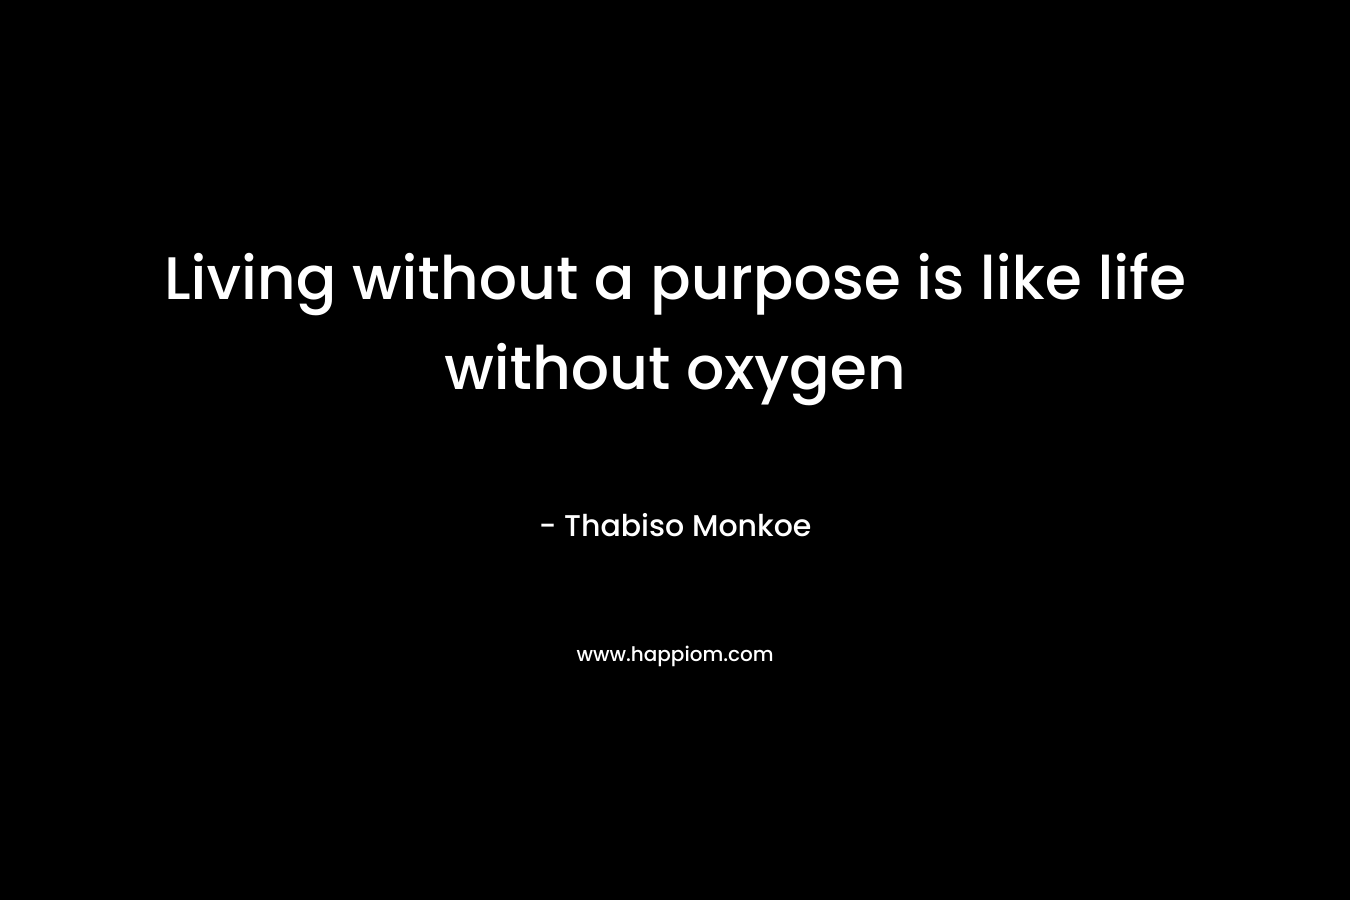 Living without a purpose is like life without oxygen